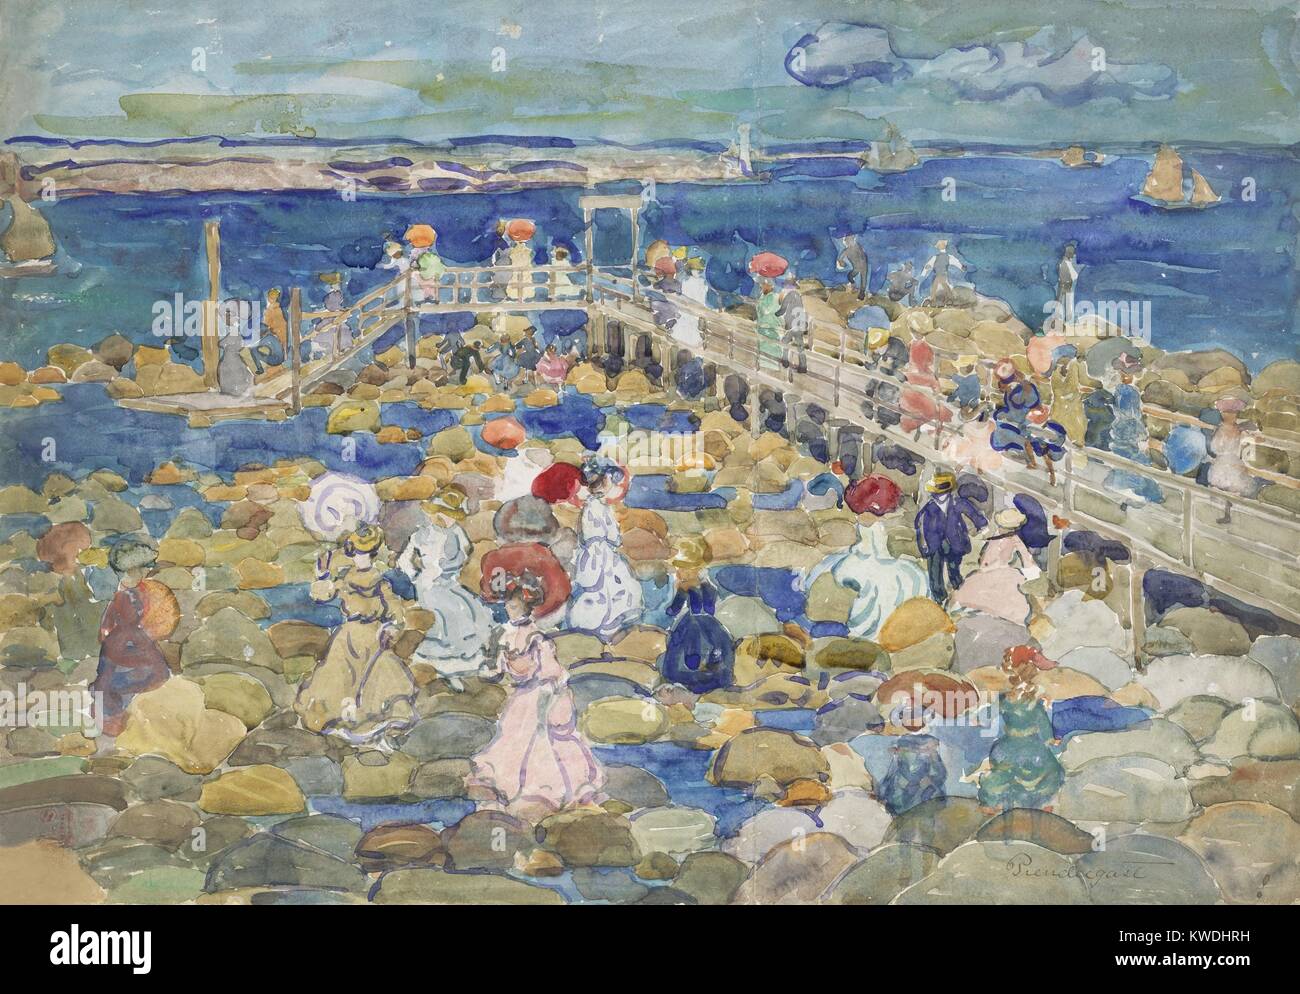 LOW TIDE, BEACHMONT, by Maurice Brazil Prendergast, 1900–05, American painting, watercolor. People enjoying beach at low tide in Beachmont, a suburb north of Boston. It shows the influence of Post Impressionist and the Nabis painters on Prendergast (BSLOC 2017 7 145) Stock Photo